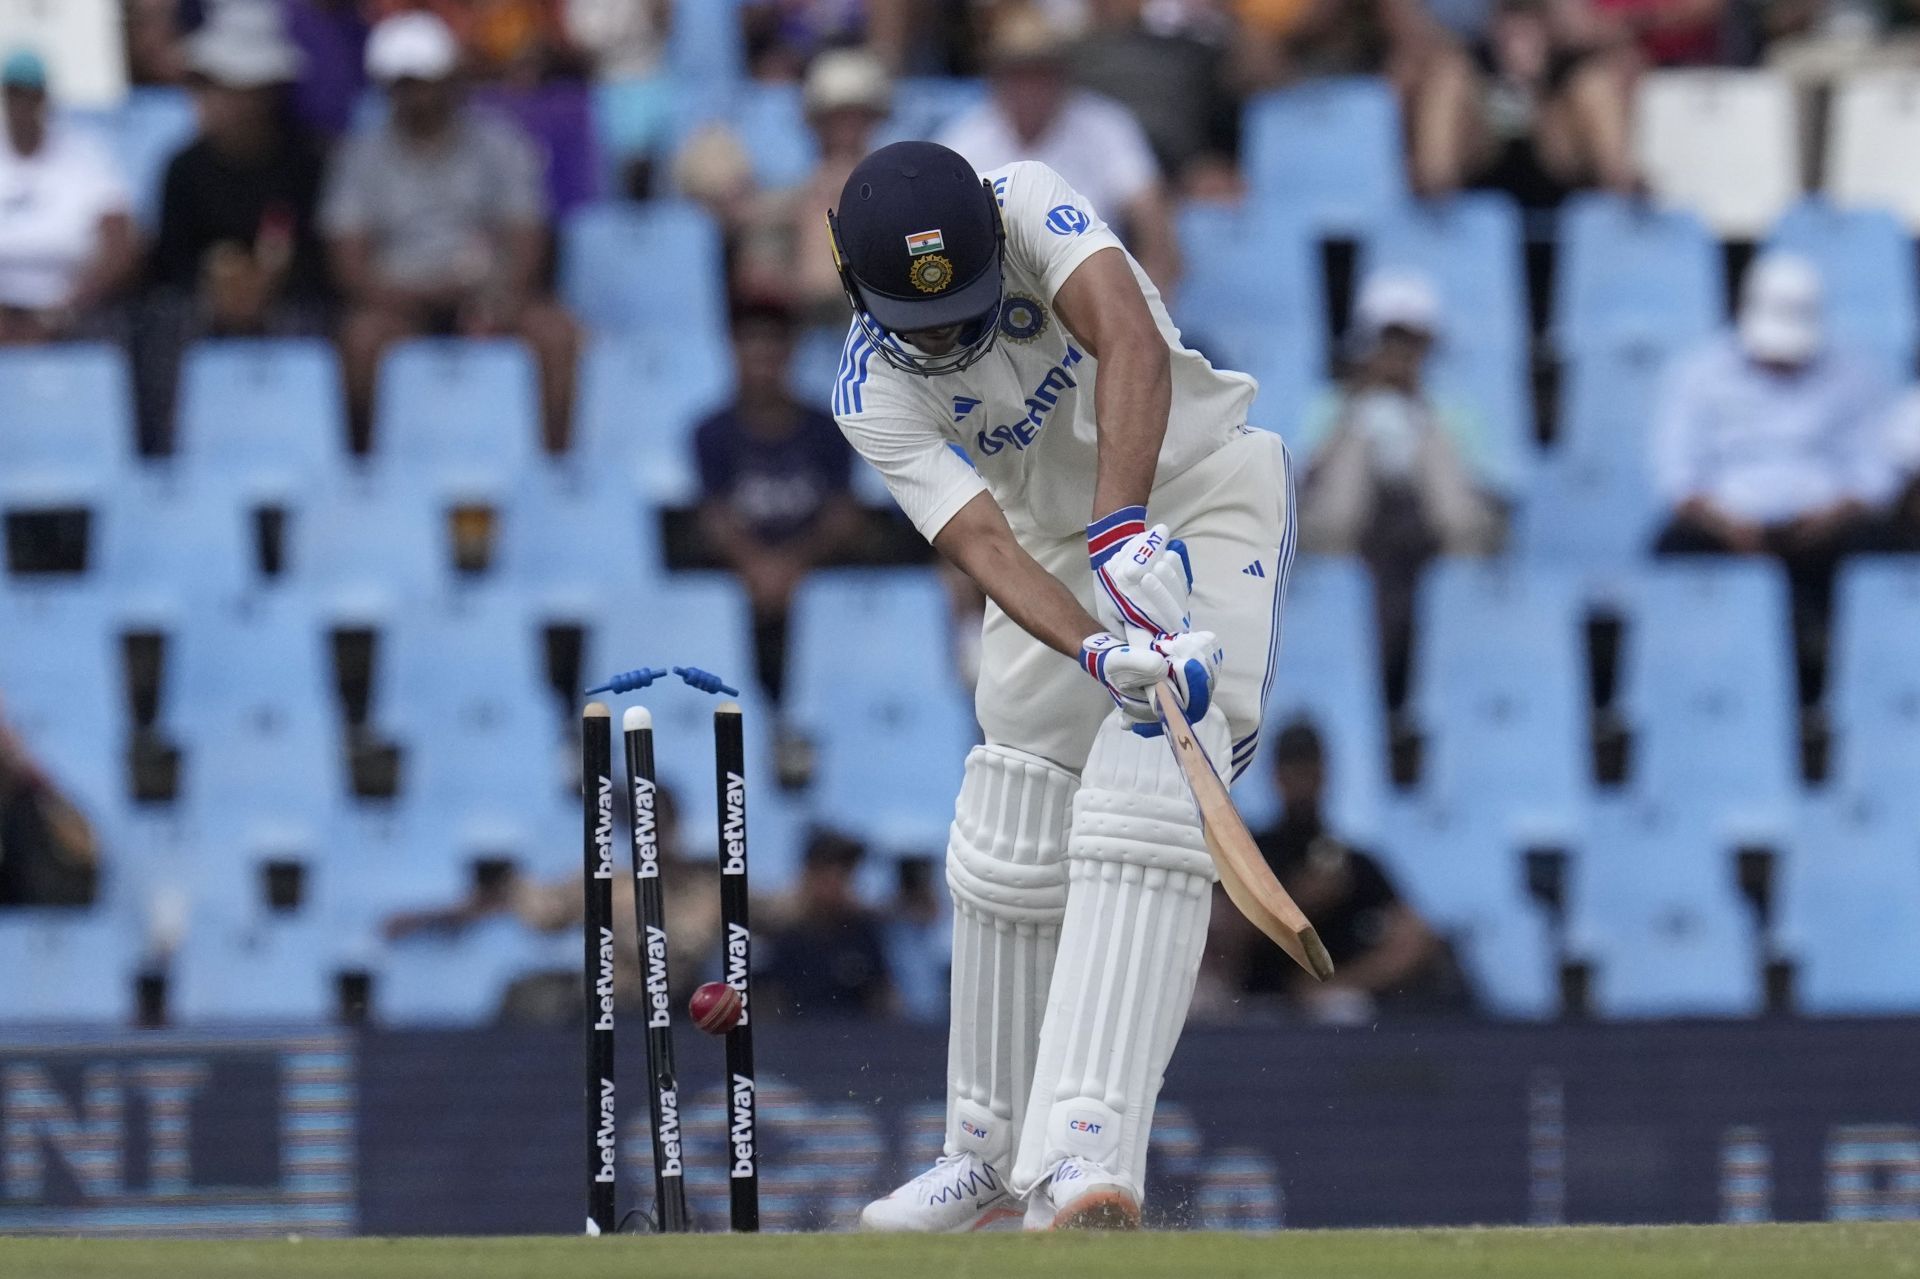 Shubman Gill was castled with ease in the second innings of the first Test